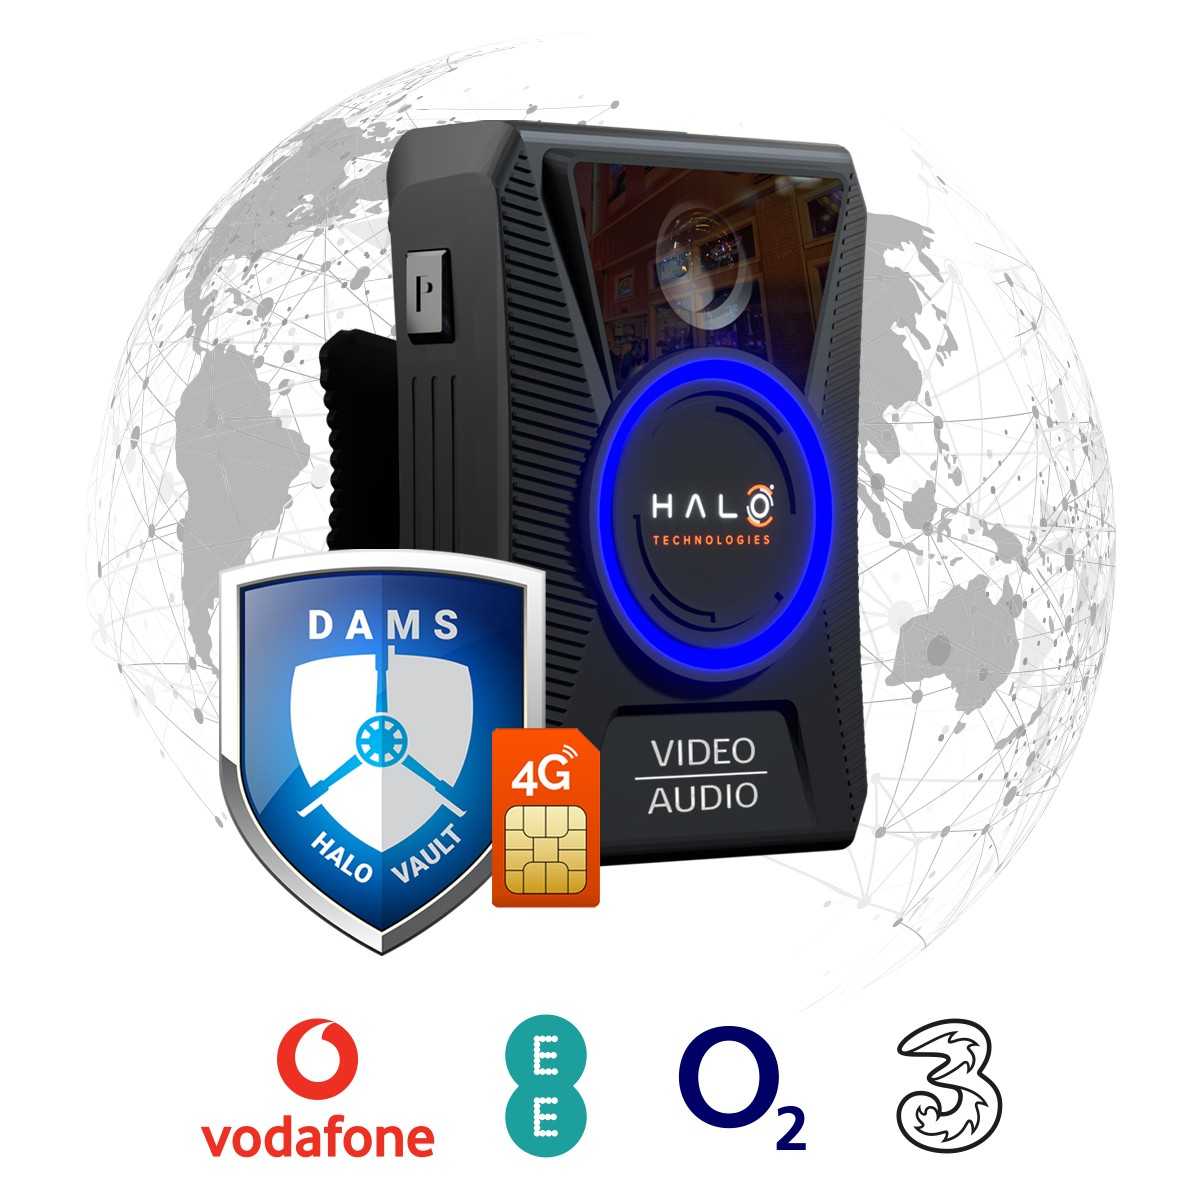 INTRODUCING THE HALO CONNECT 4G BODY CAM BUNDLE TO THE UK